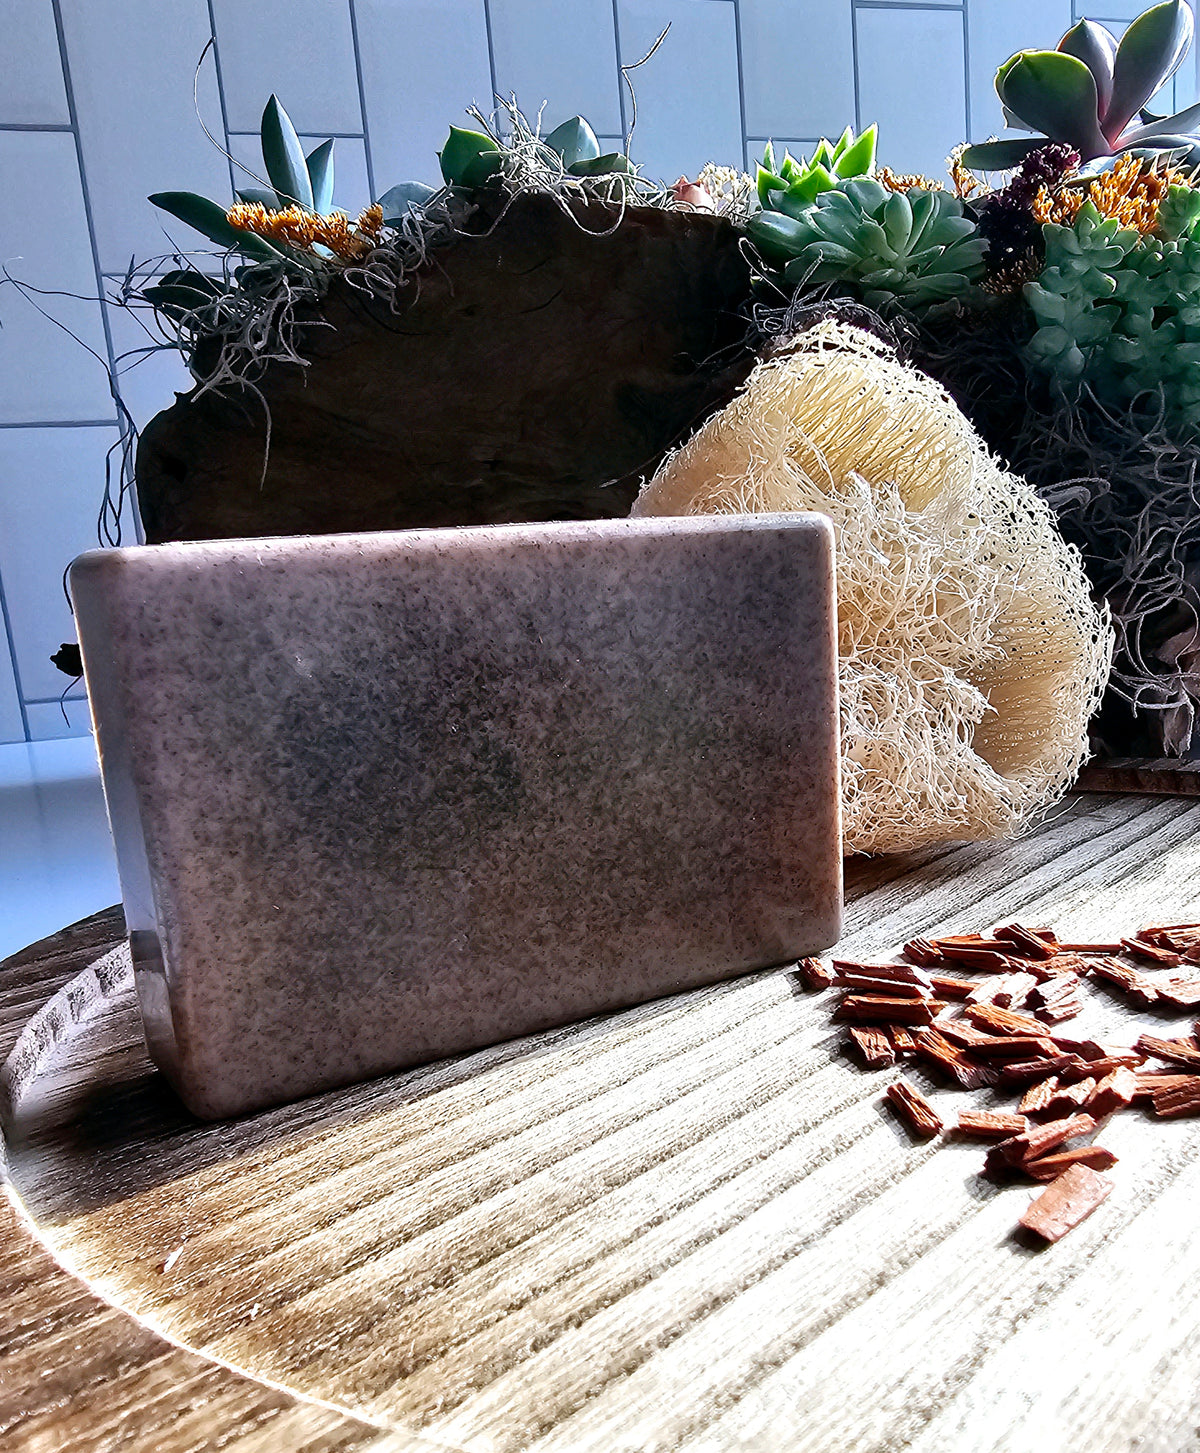 Sandalwood + Spice Scented Soap